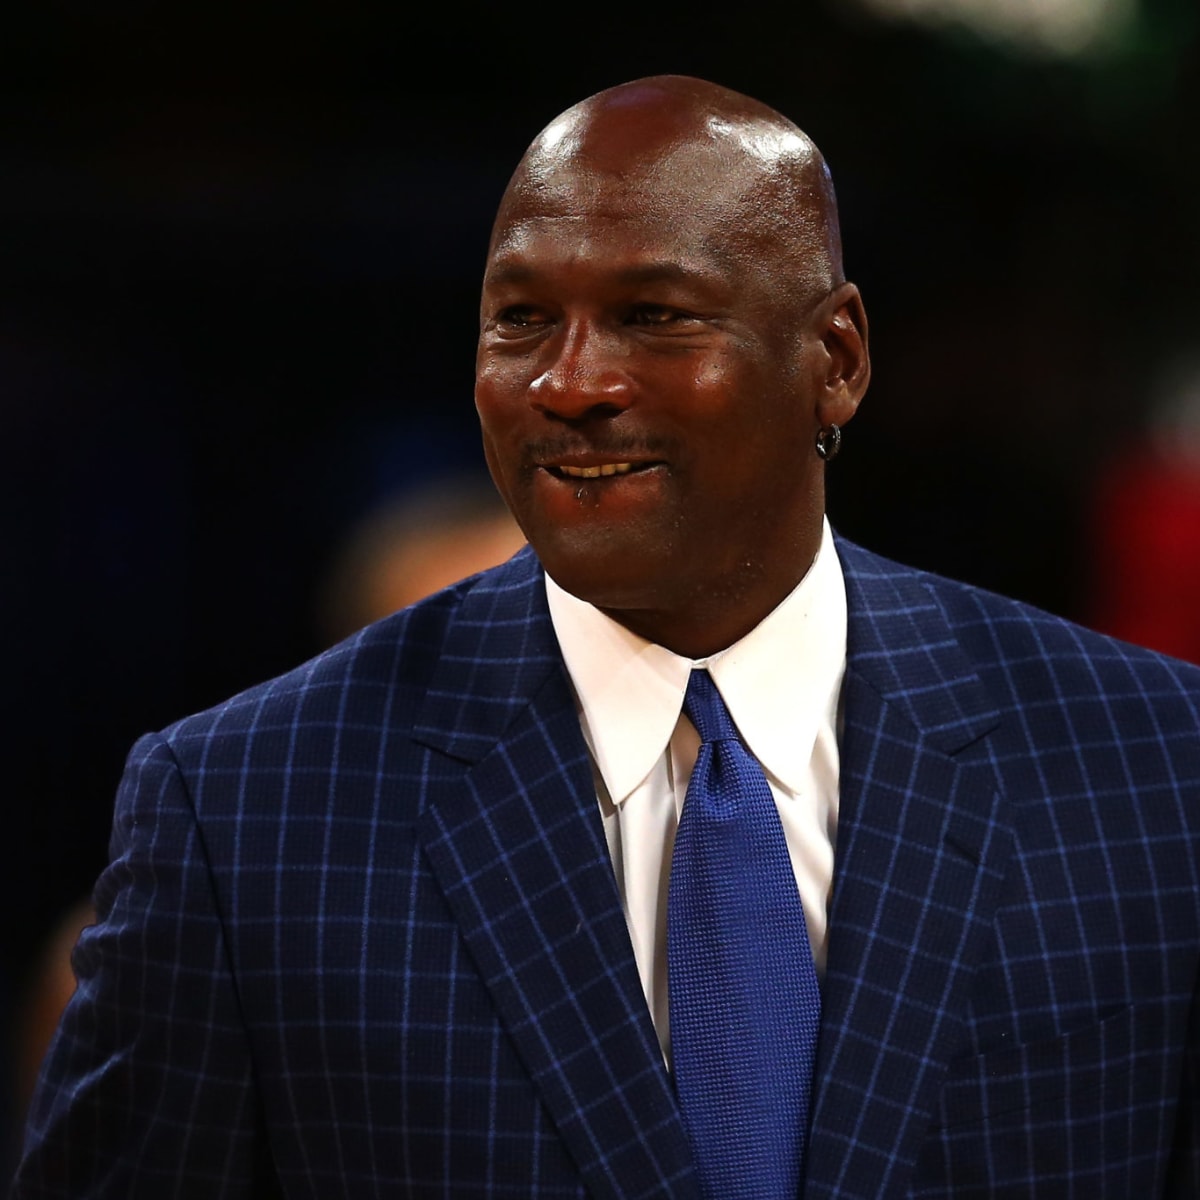 Michael Jordan Once Called Out Magic Johnson for Having Fun During